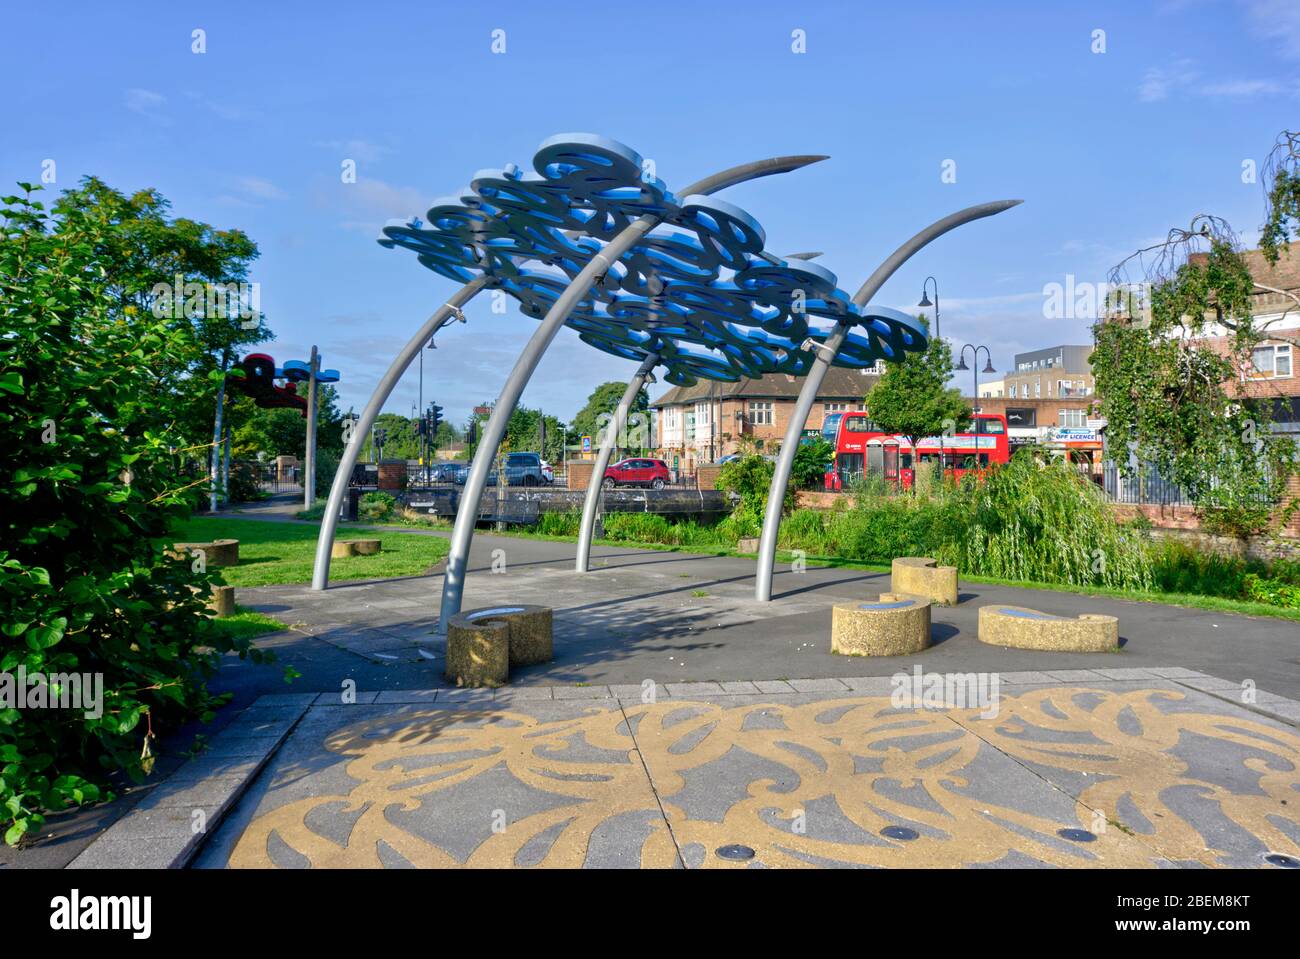 Crayford, Kent, United Kingdom - August 19, 2019: David Evans Pavilion and Water Feature Waterside Gardens artwork referring to historic local industr Stock Photo